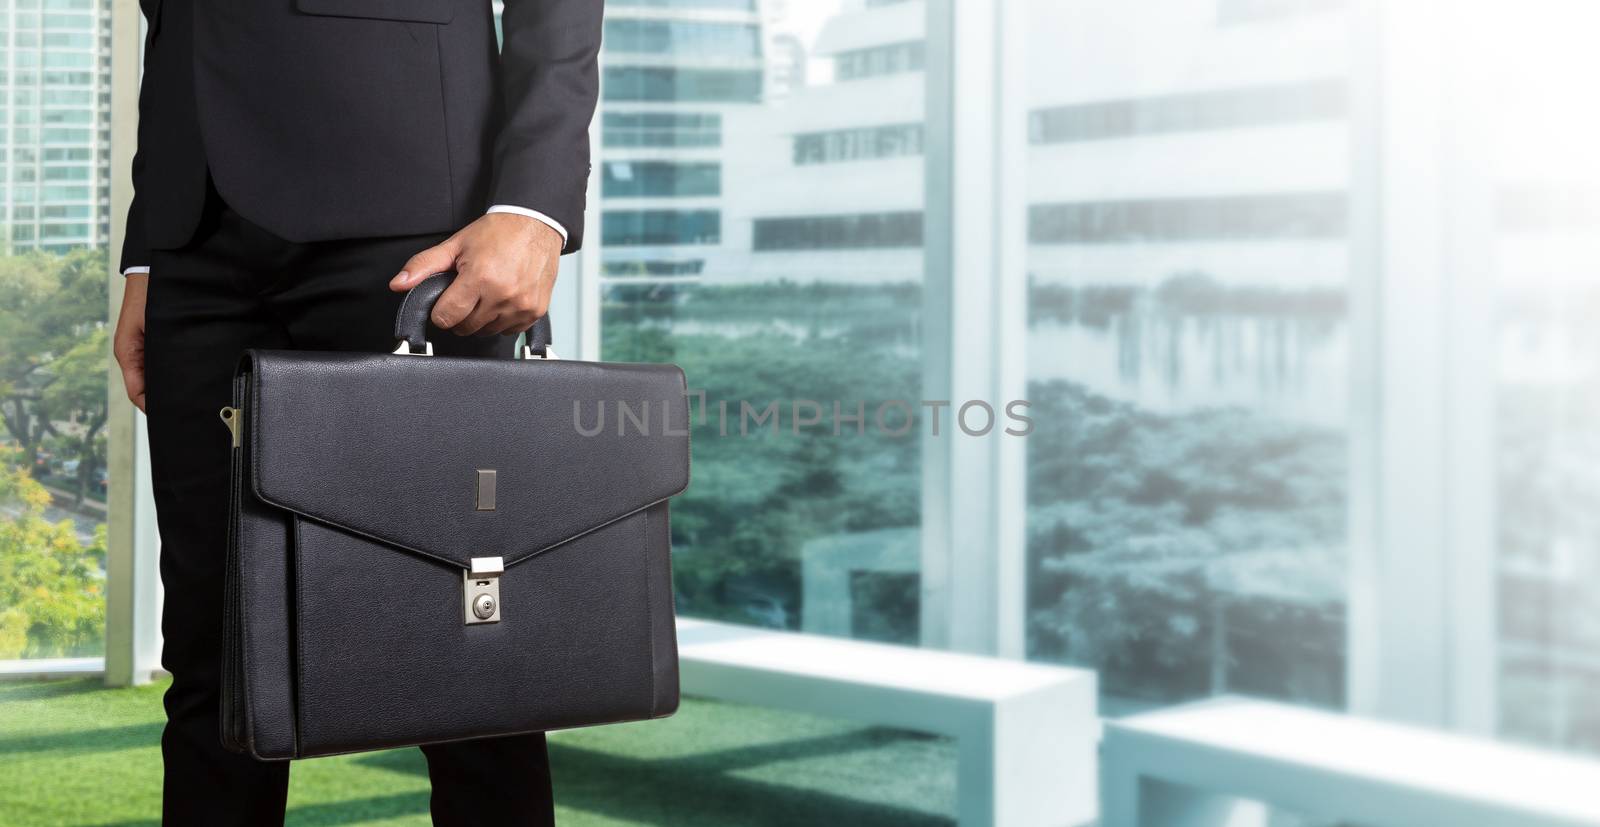 Businessman holding a briefcase in a modern office